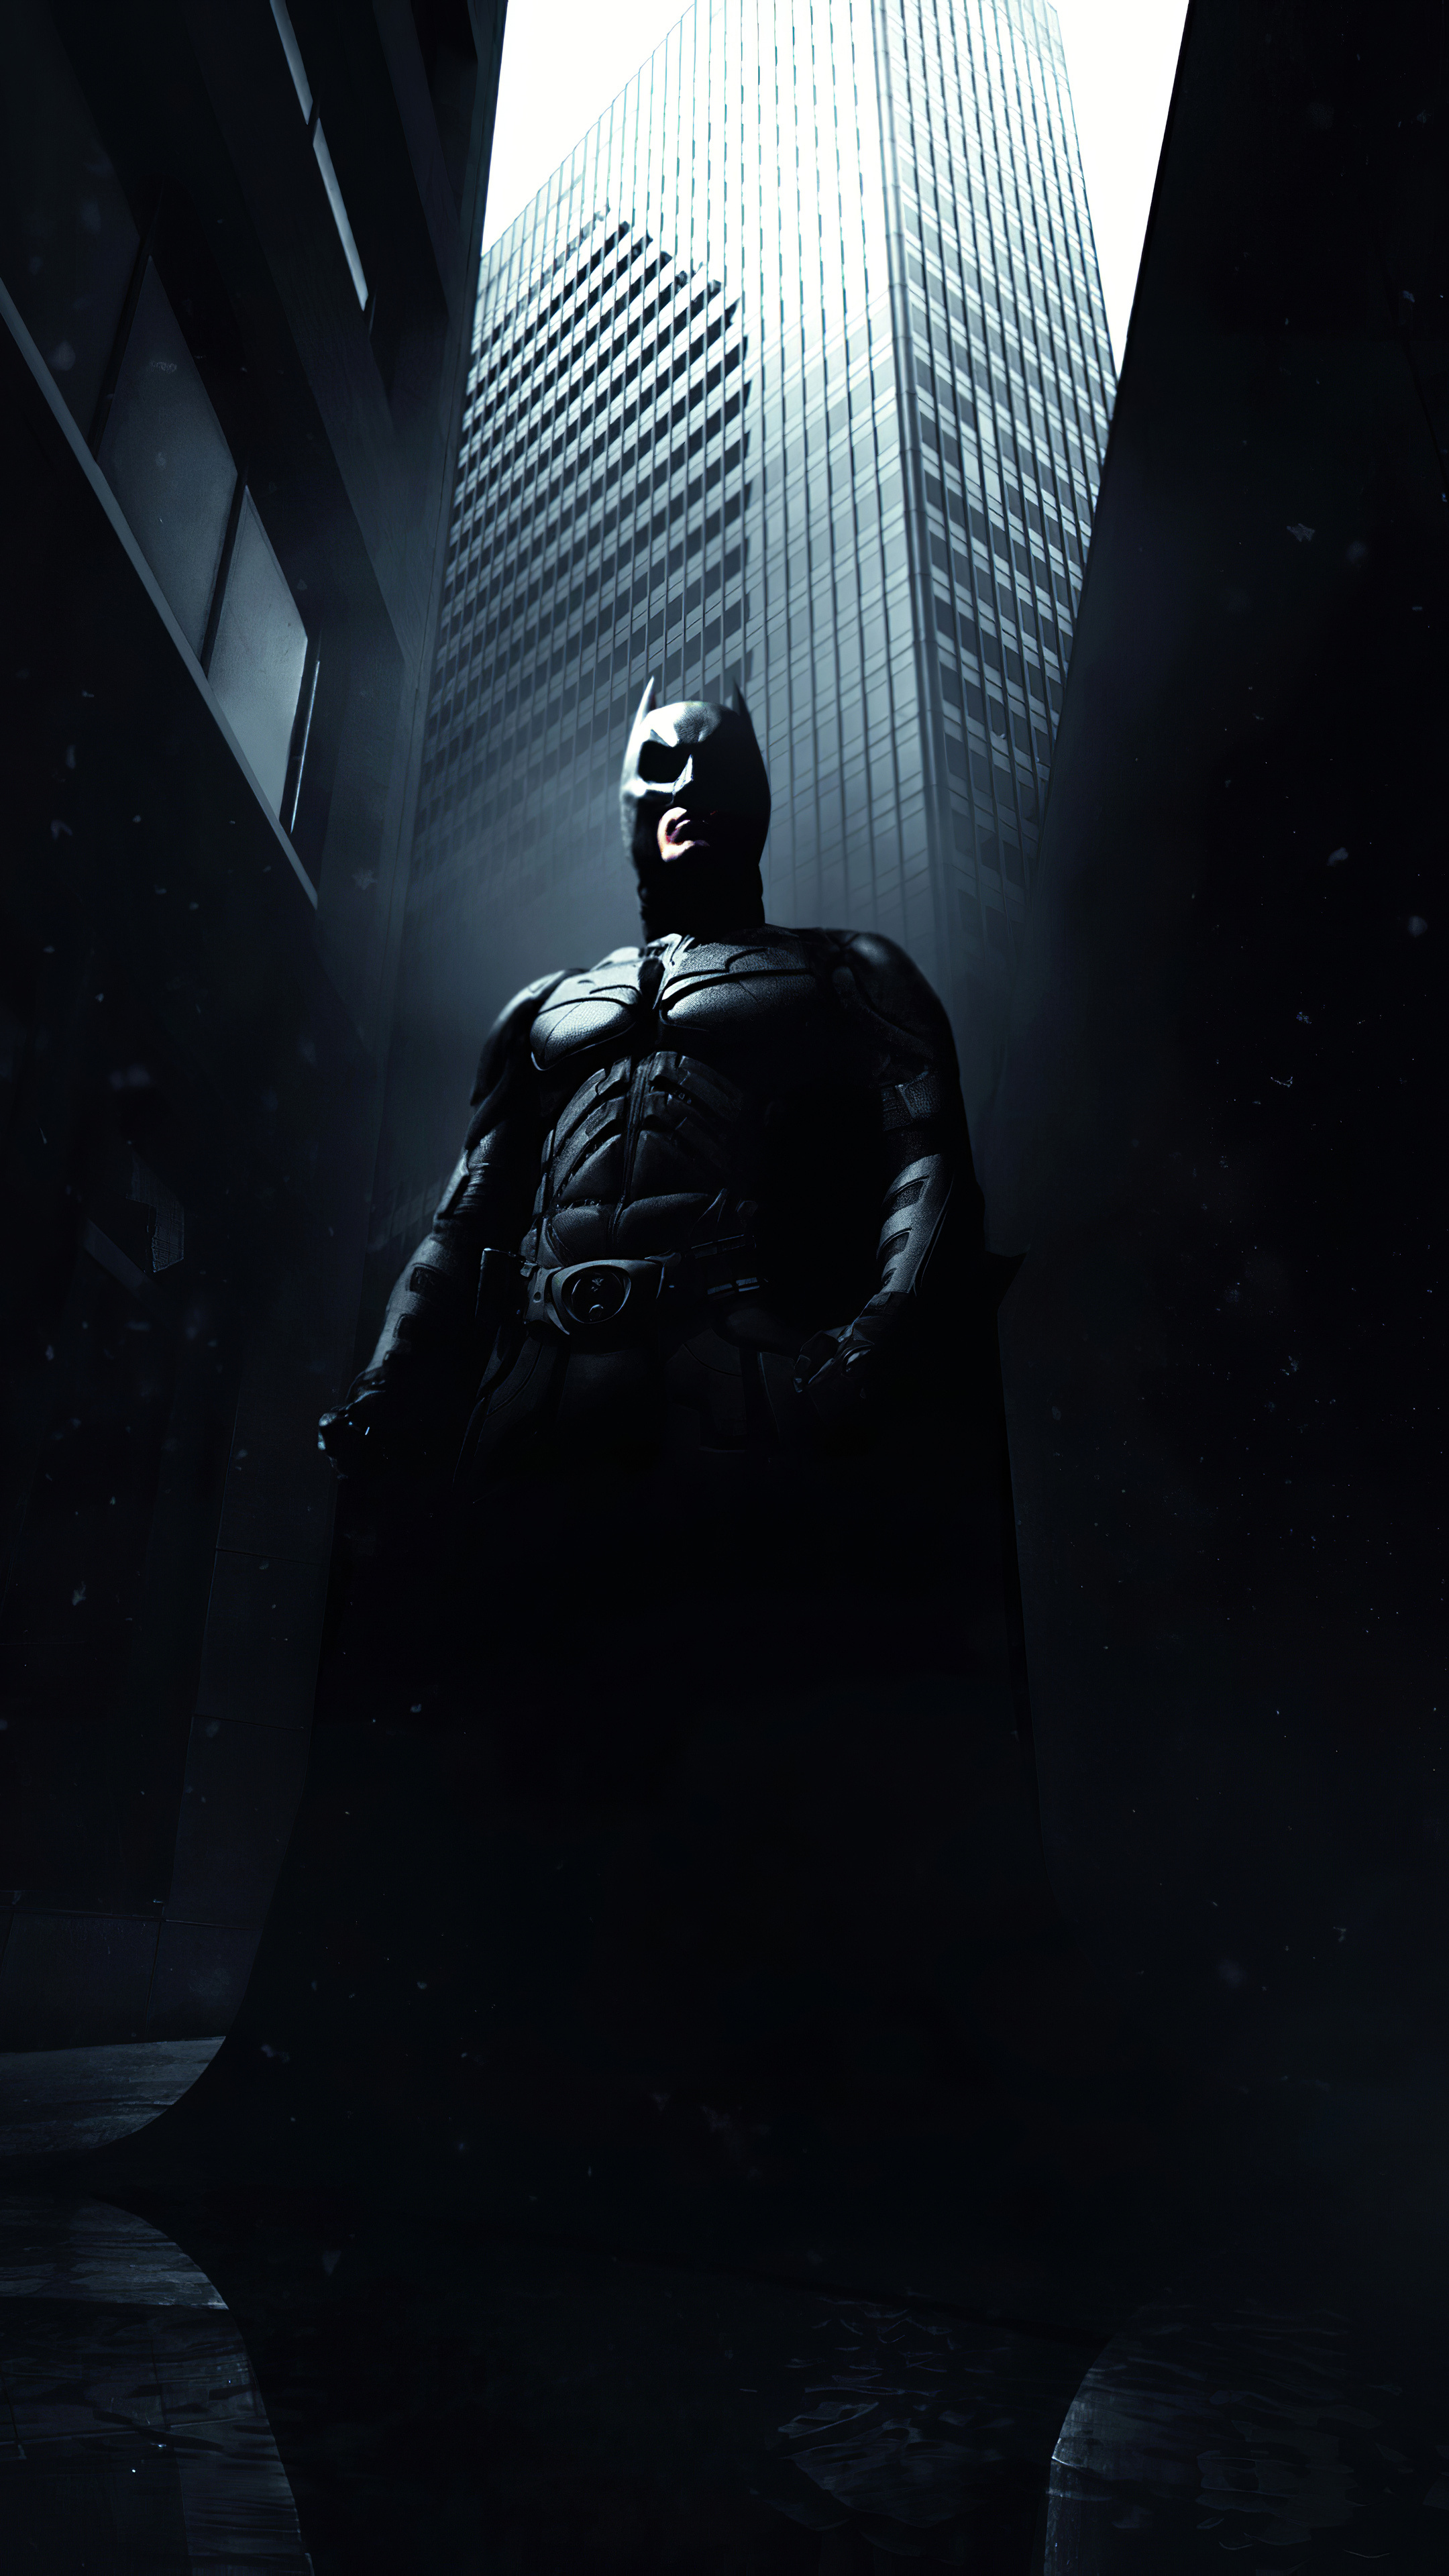 Christian Bale: The Dark Knight, Directed by Christopher Nolan. 2160x3840 4K Background.